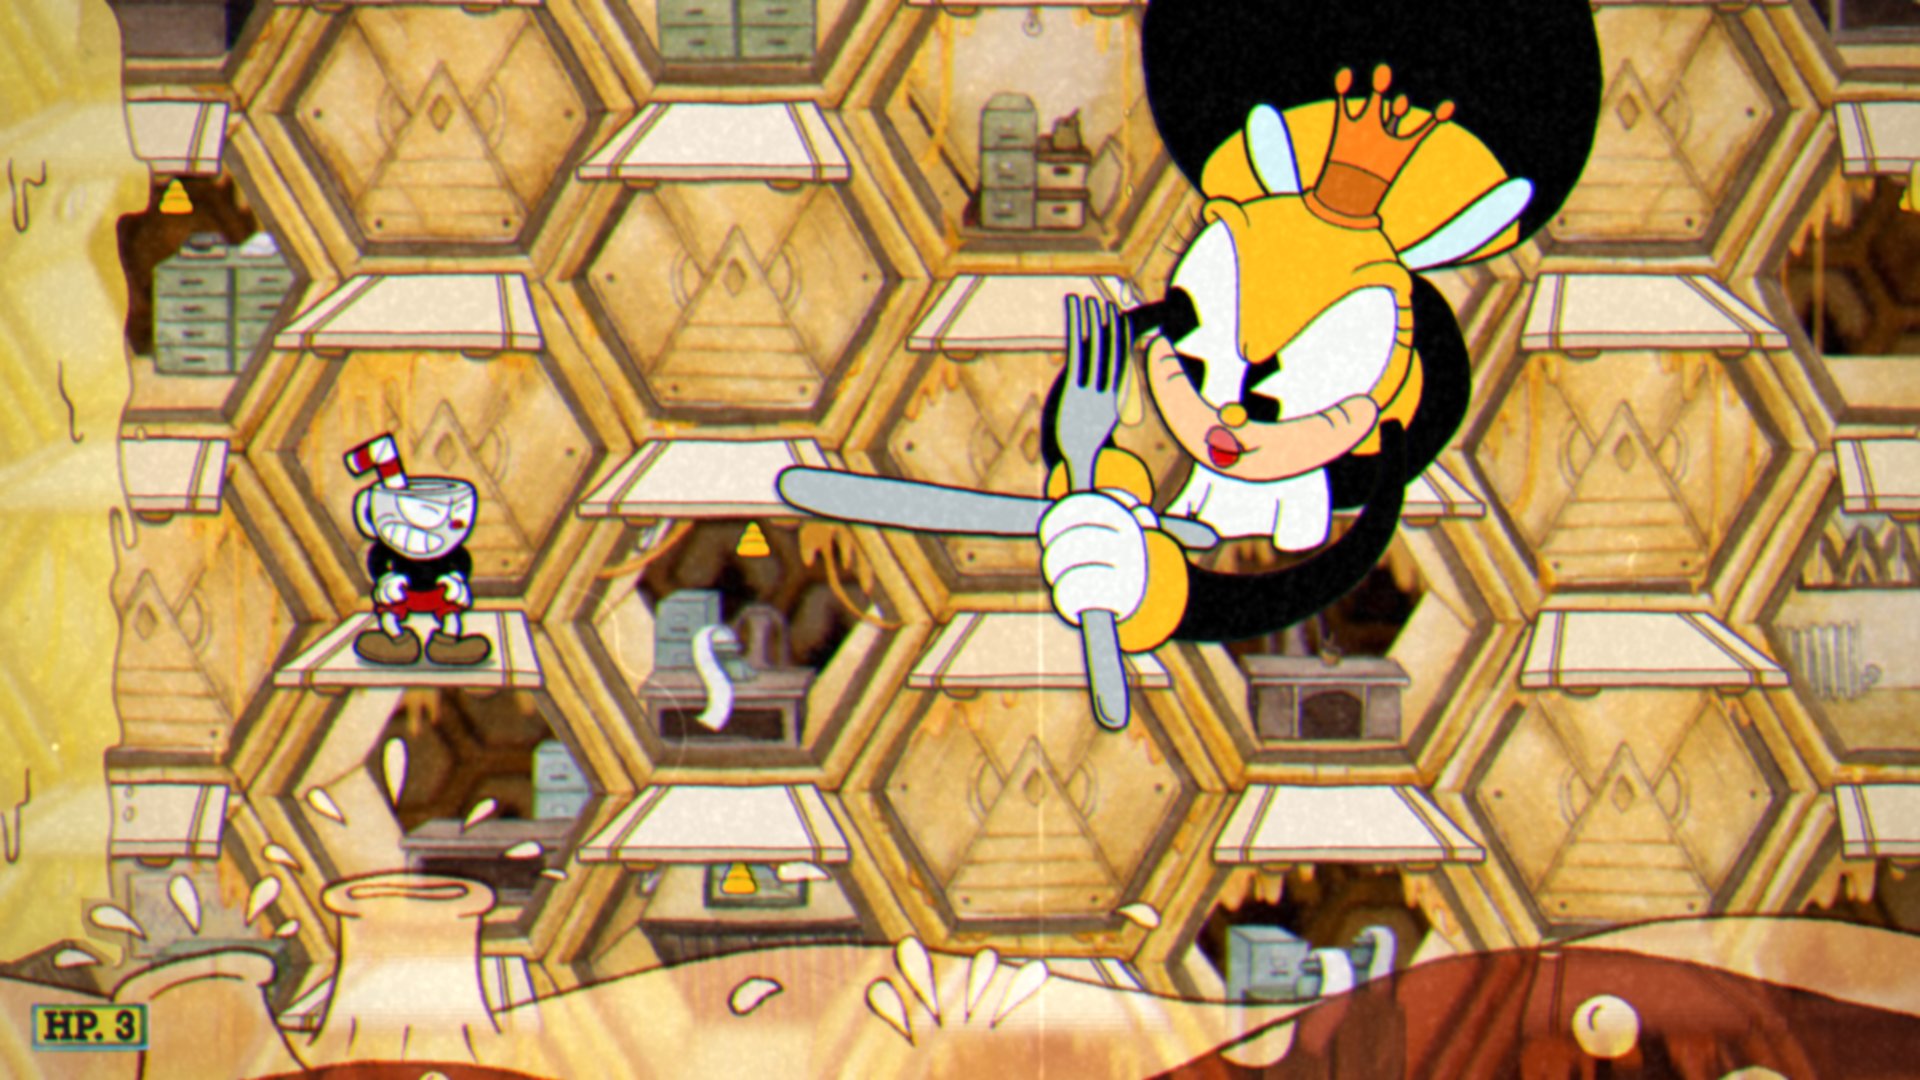 Cuphead Bosses Ranking Them All 19 From Easy To Hard 